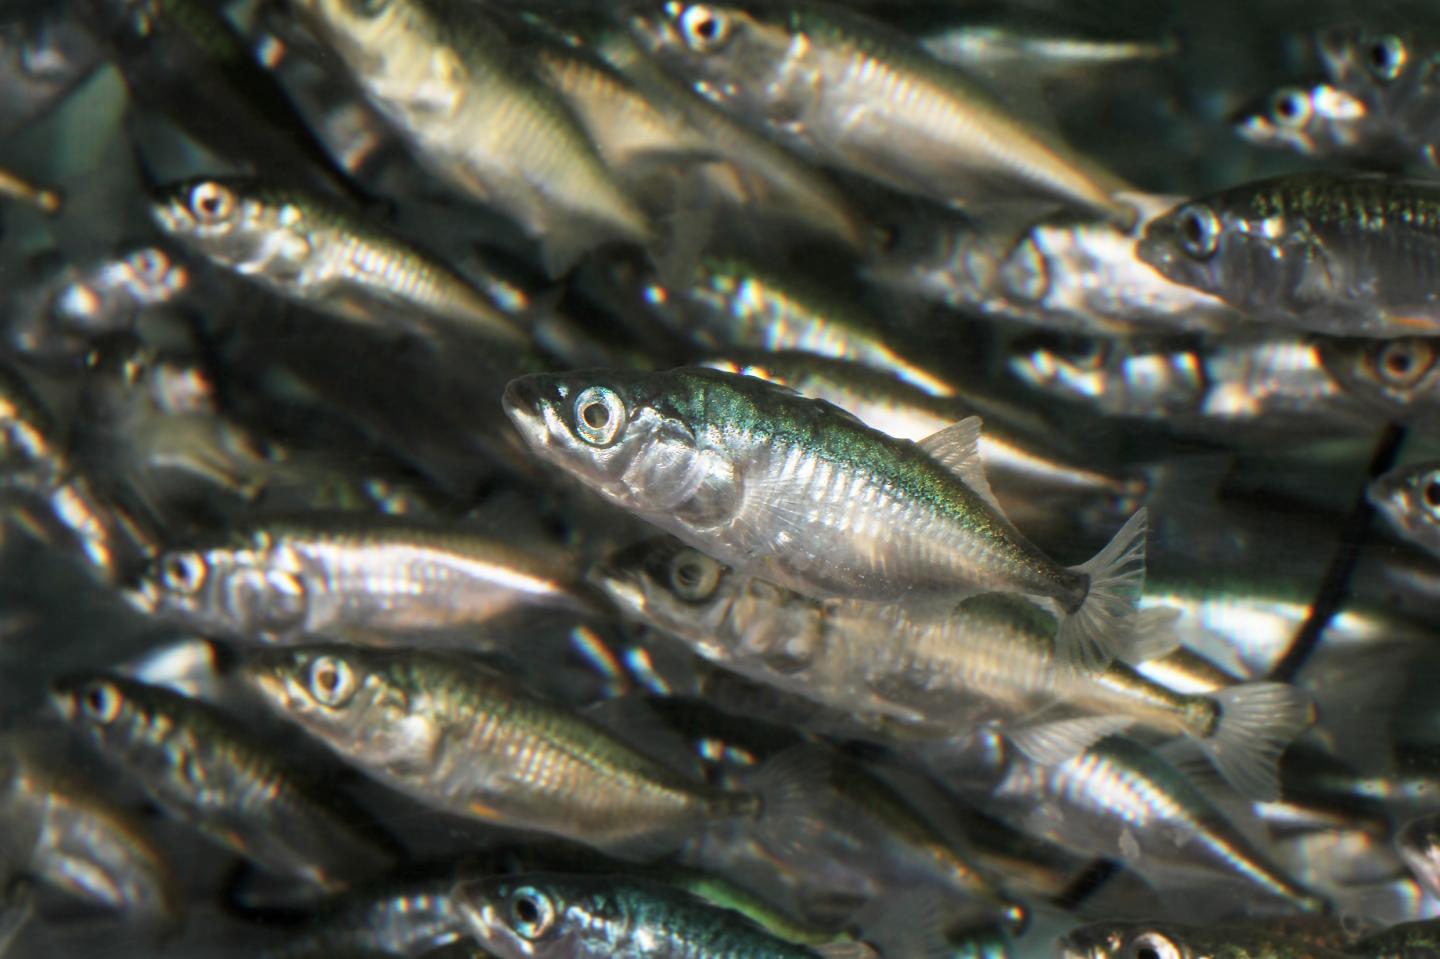 The Three-spined Stickleback